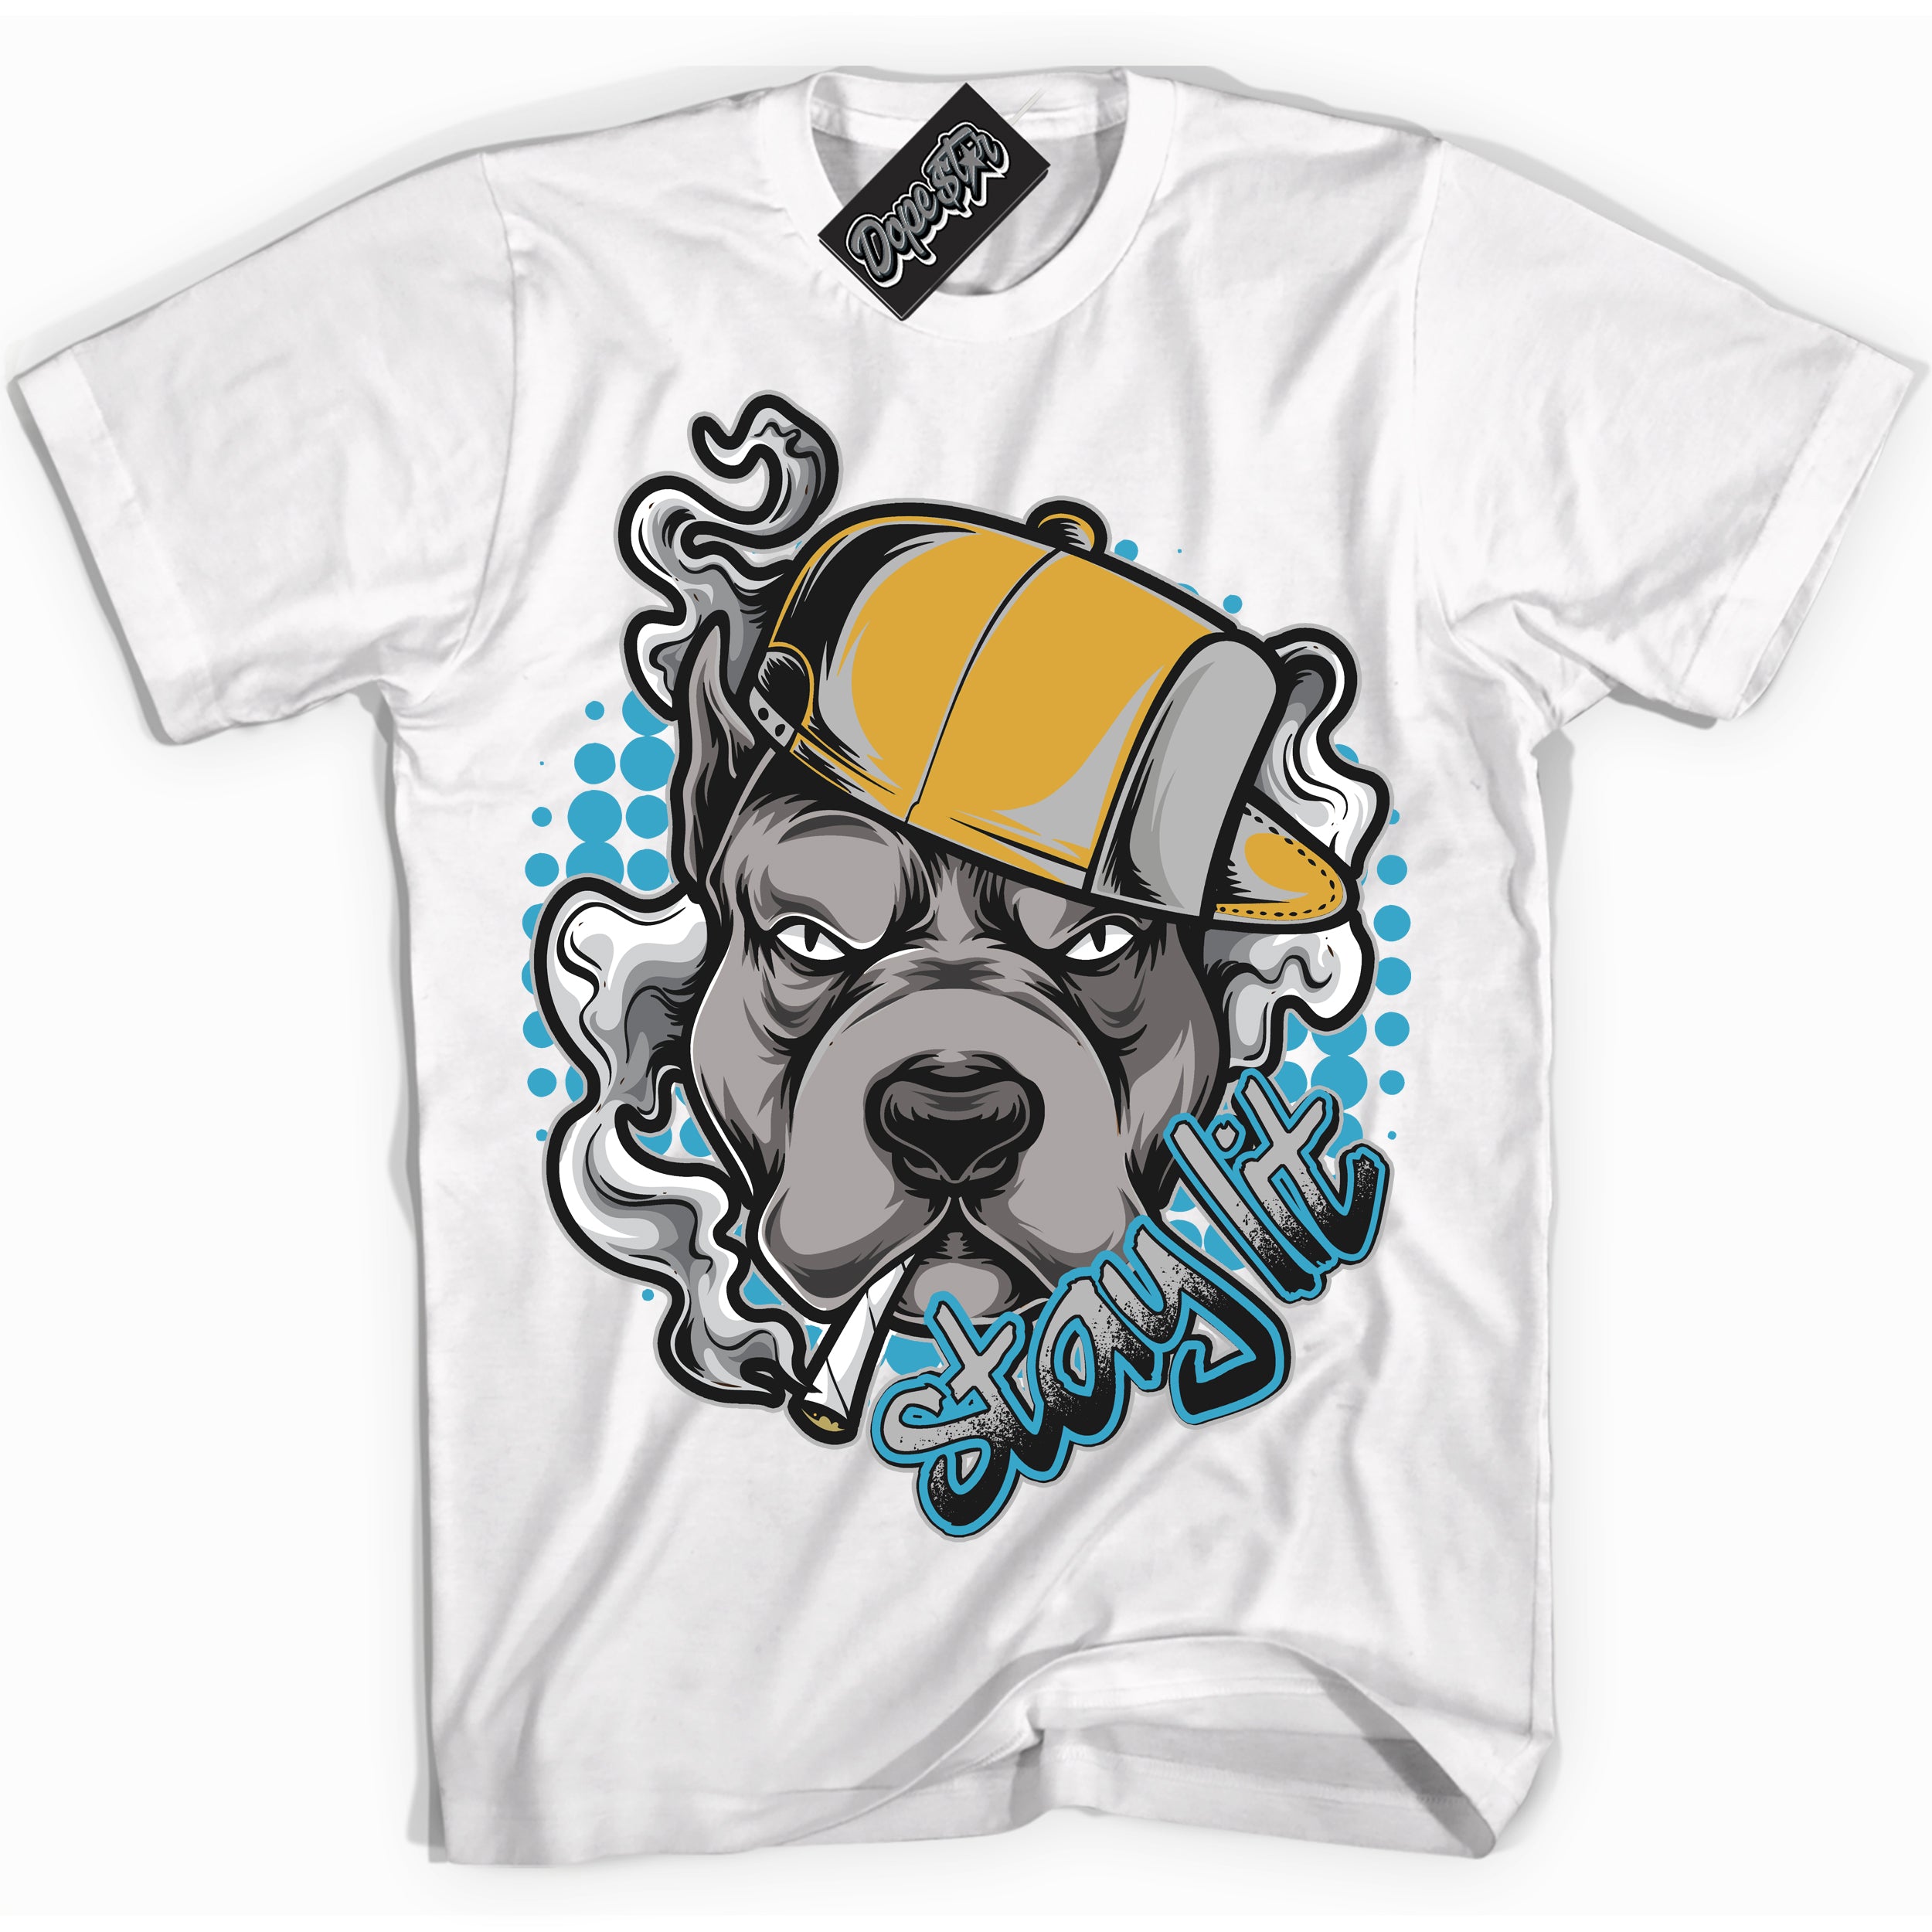 Cool White graphic tee with “ Stay Lit ” print, that perfectly matches Air Jordan 5 Aqua sneakers 